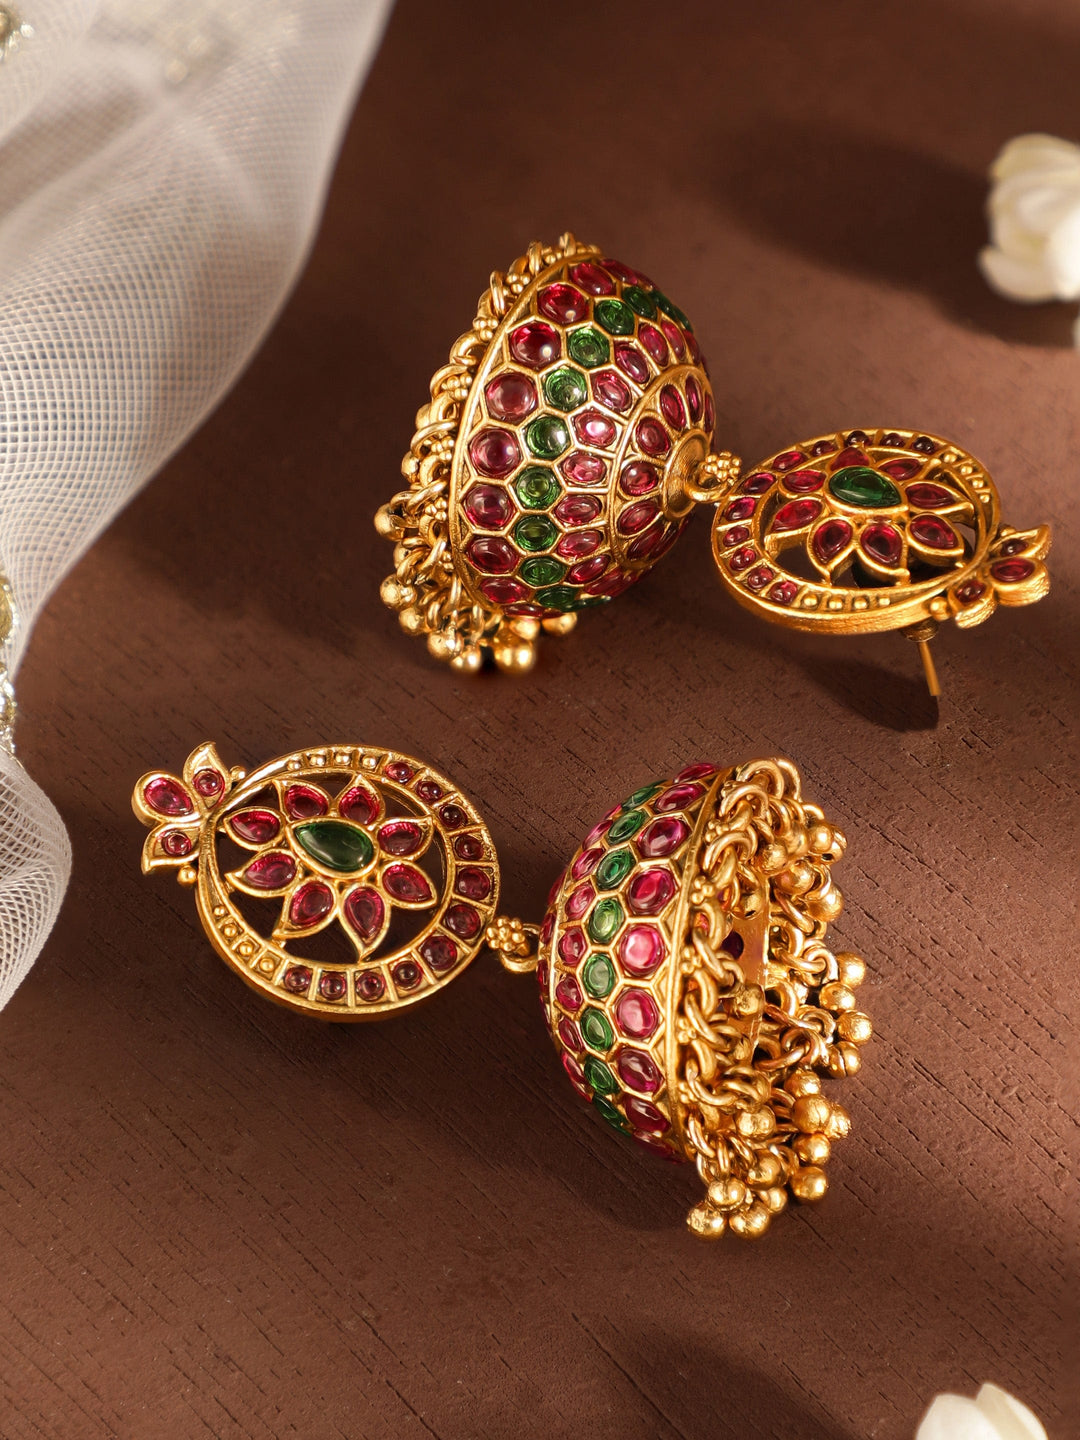 Rubans 22k Gold-Plated Dome Shape Jhumka Earrings with Red and Green Stone Earrings